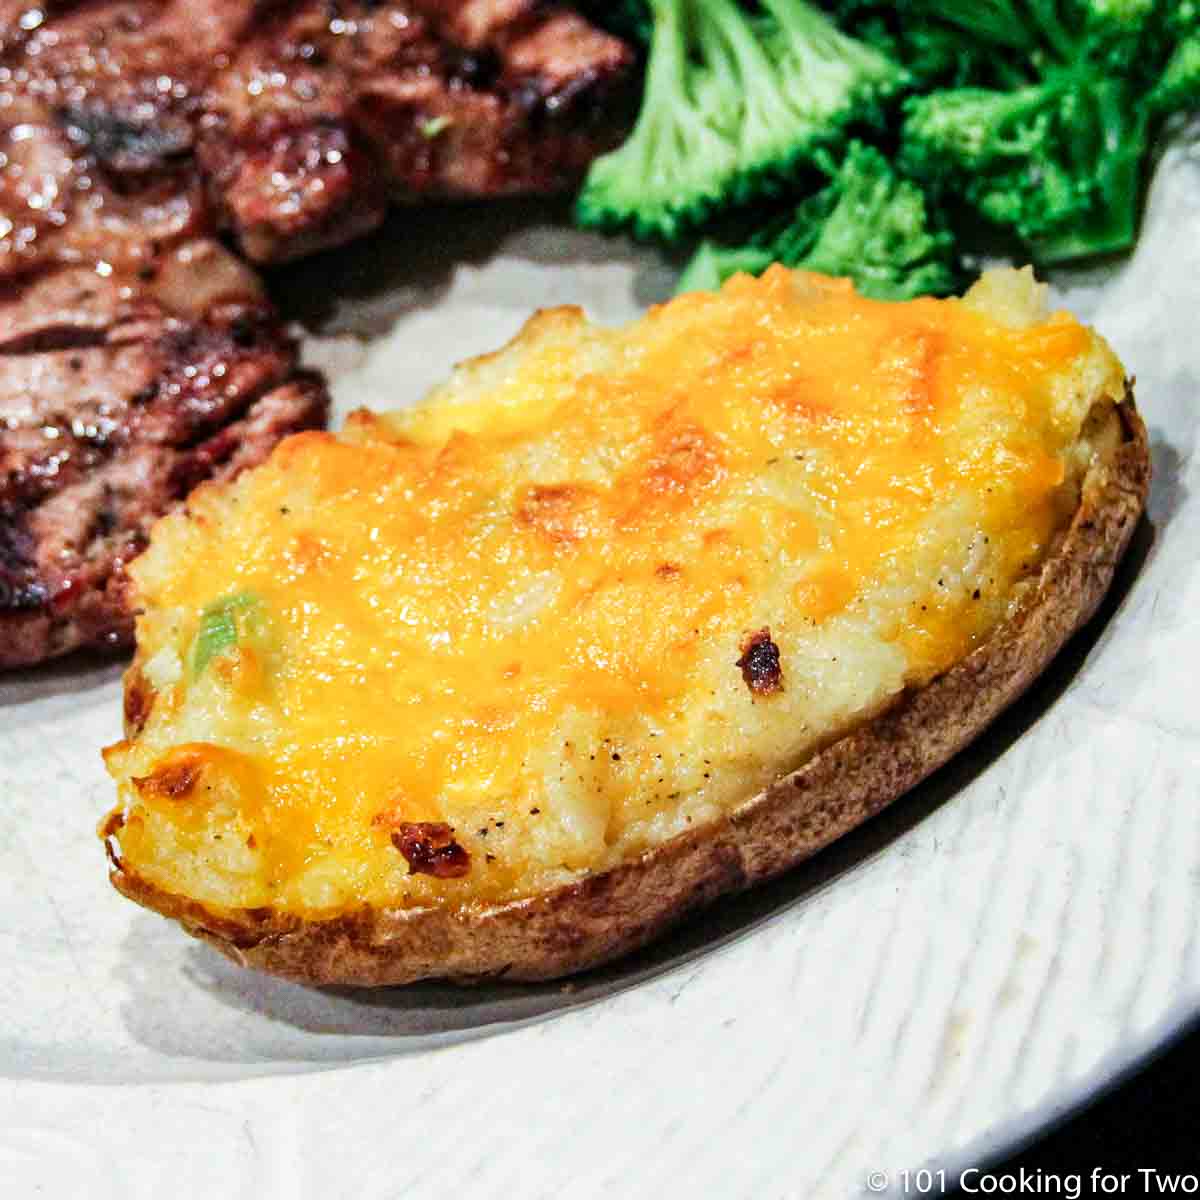 twice baked potato on white plate with meal